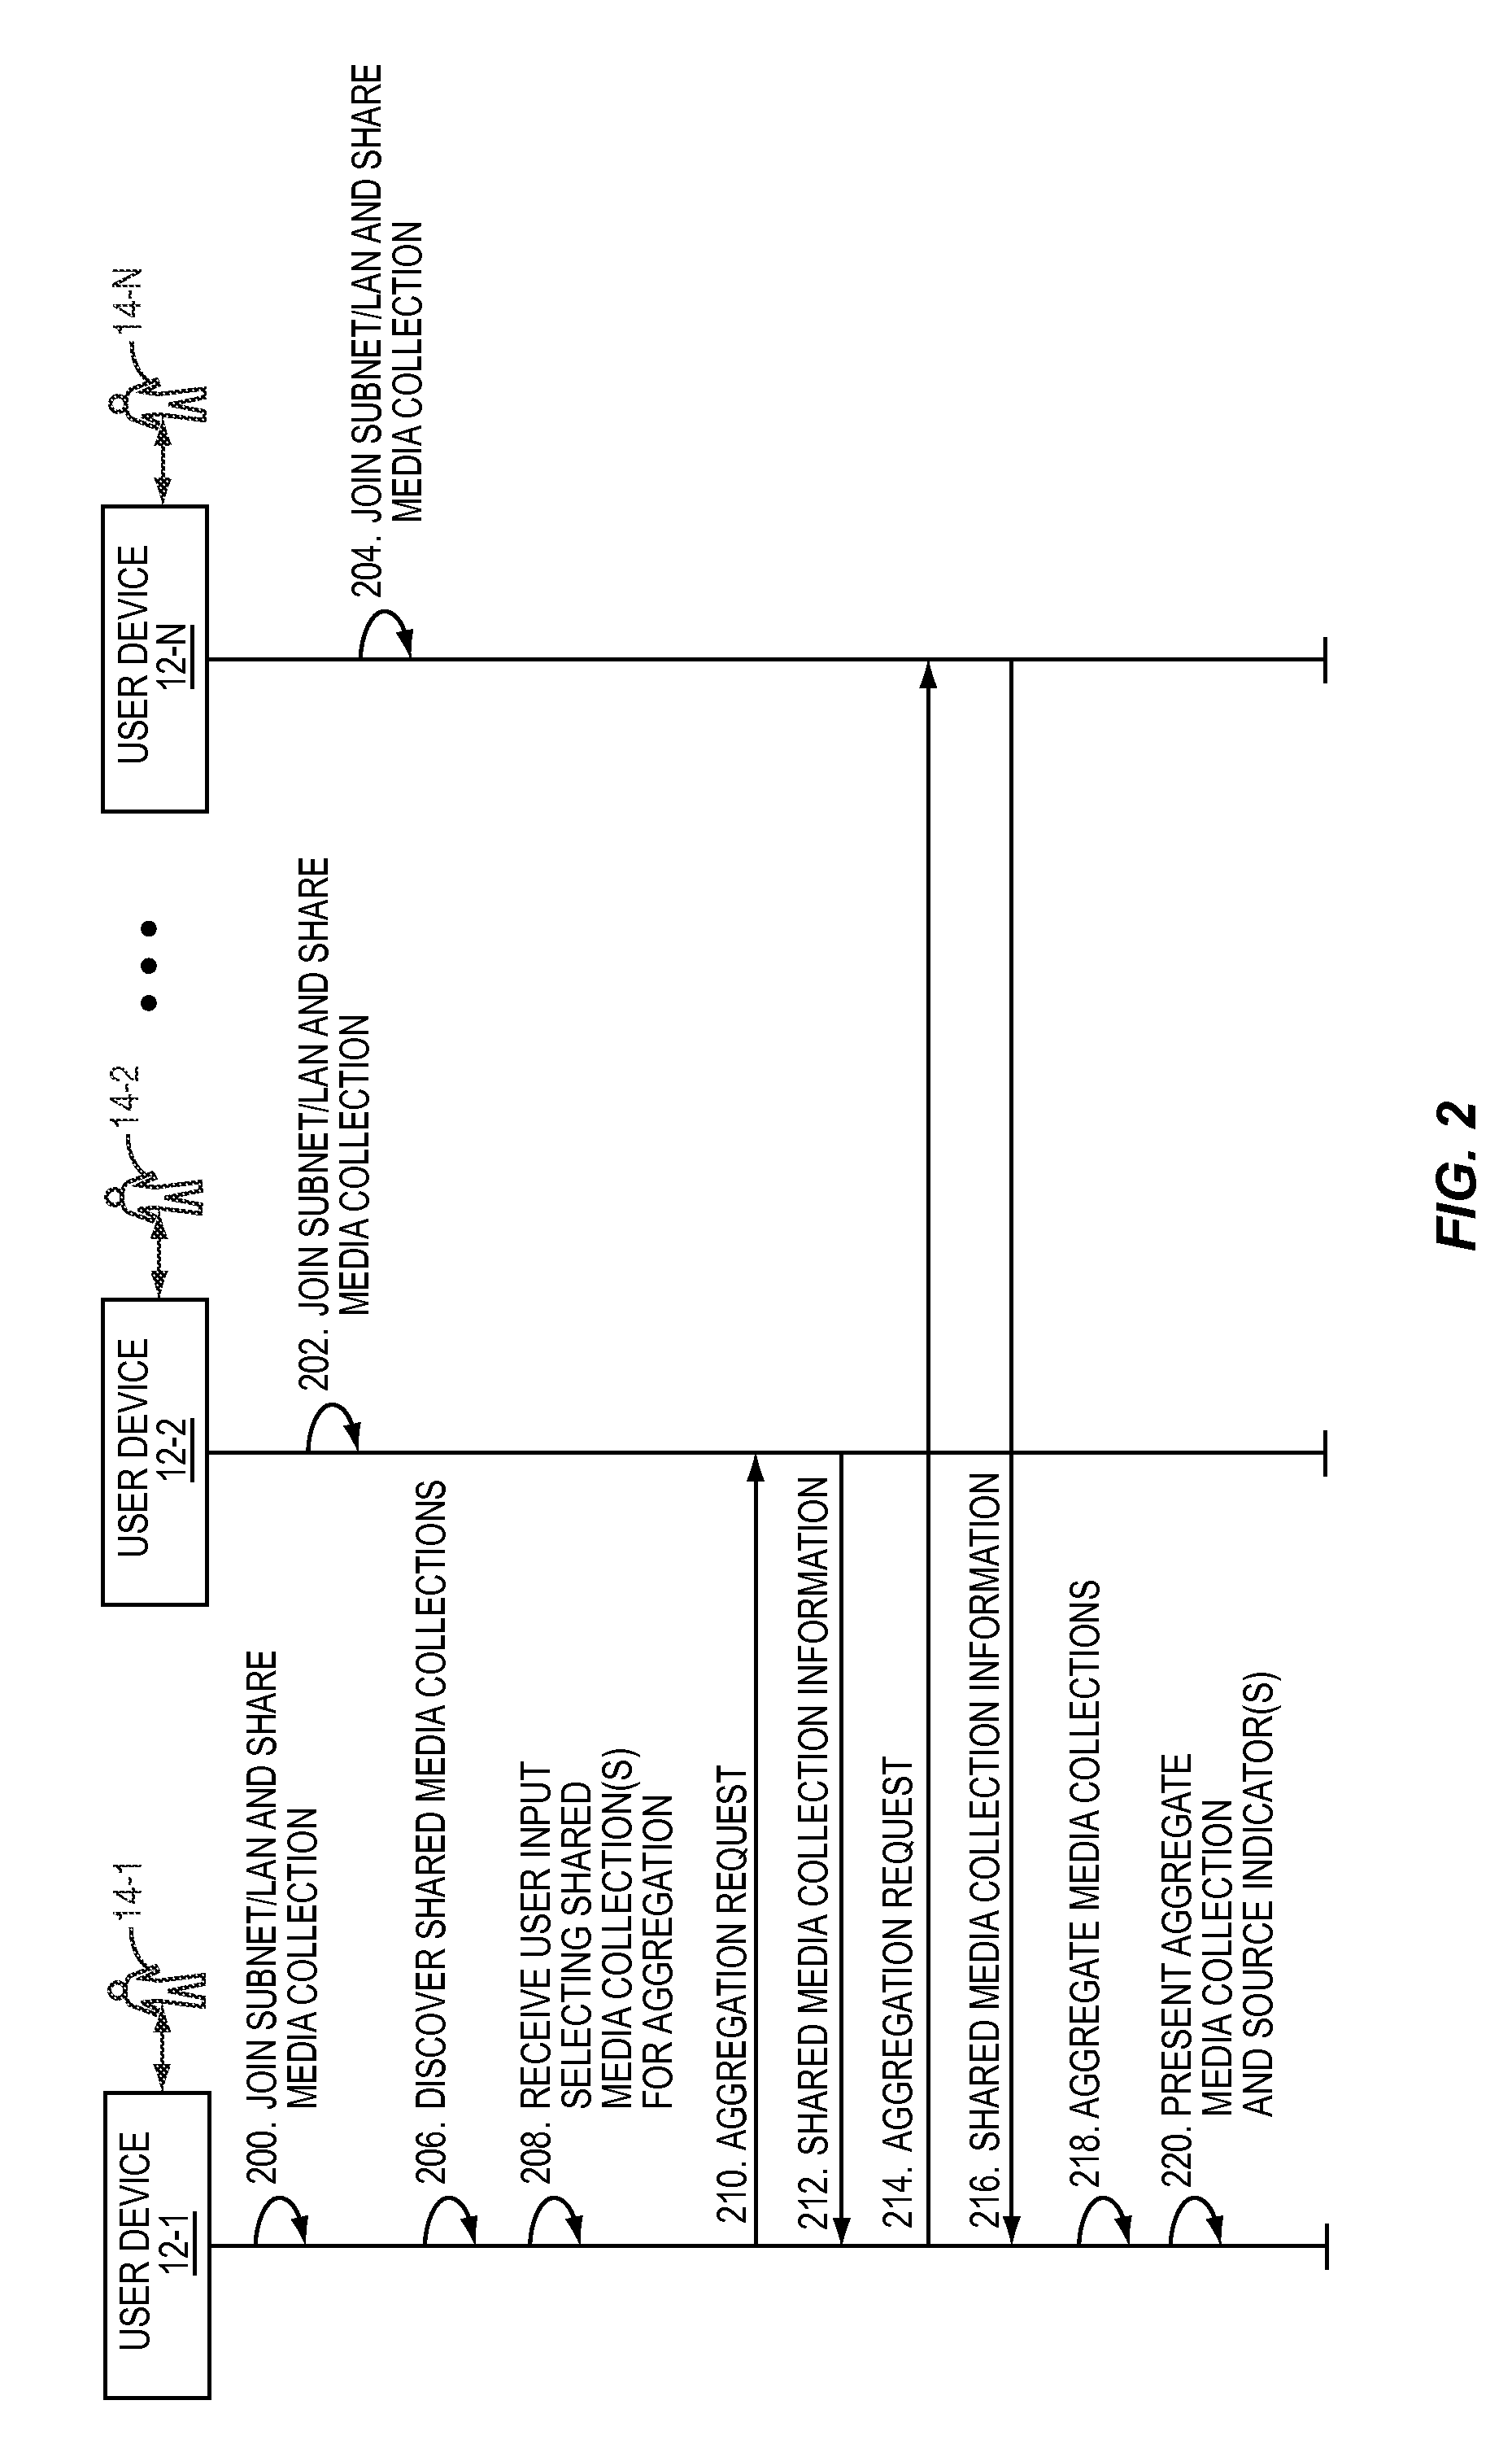 Caching and synching process for a media sharing system